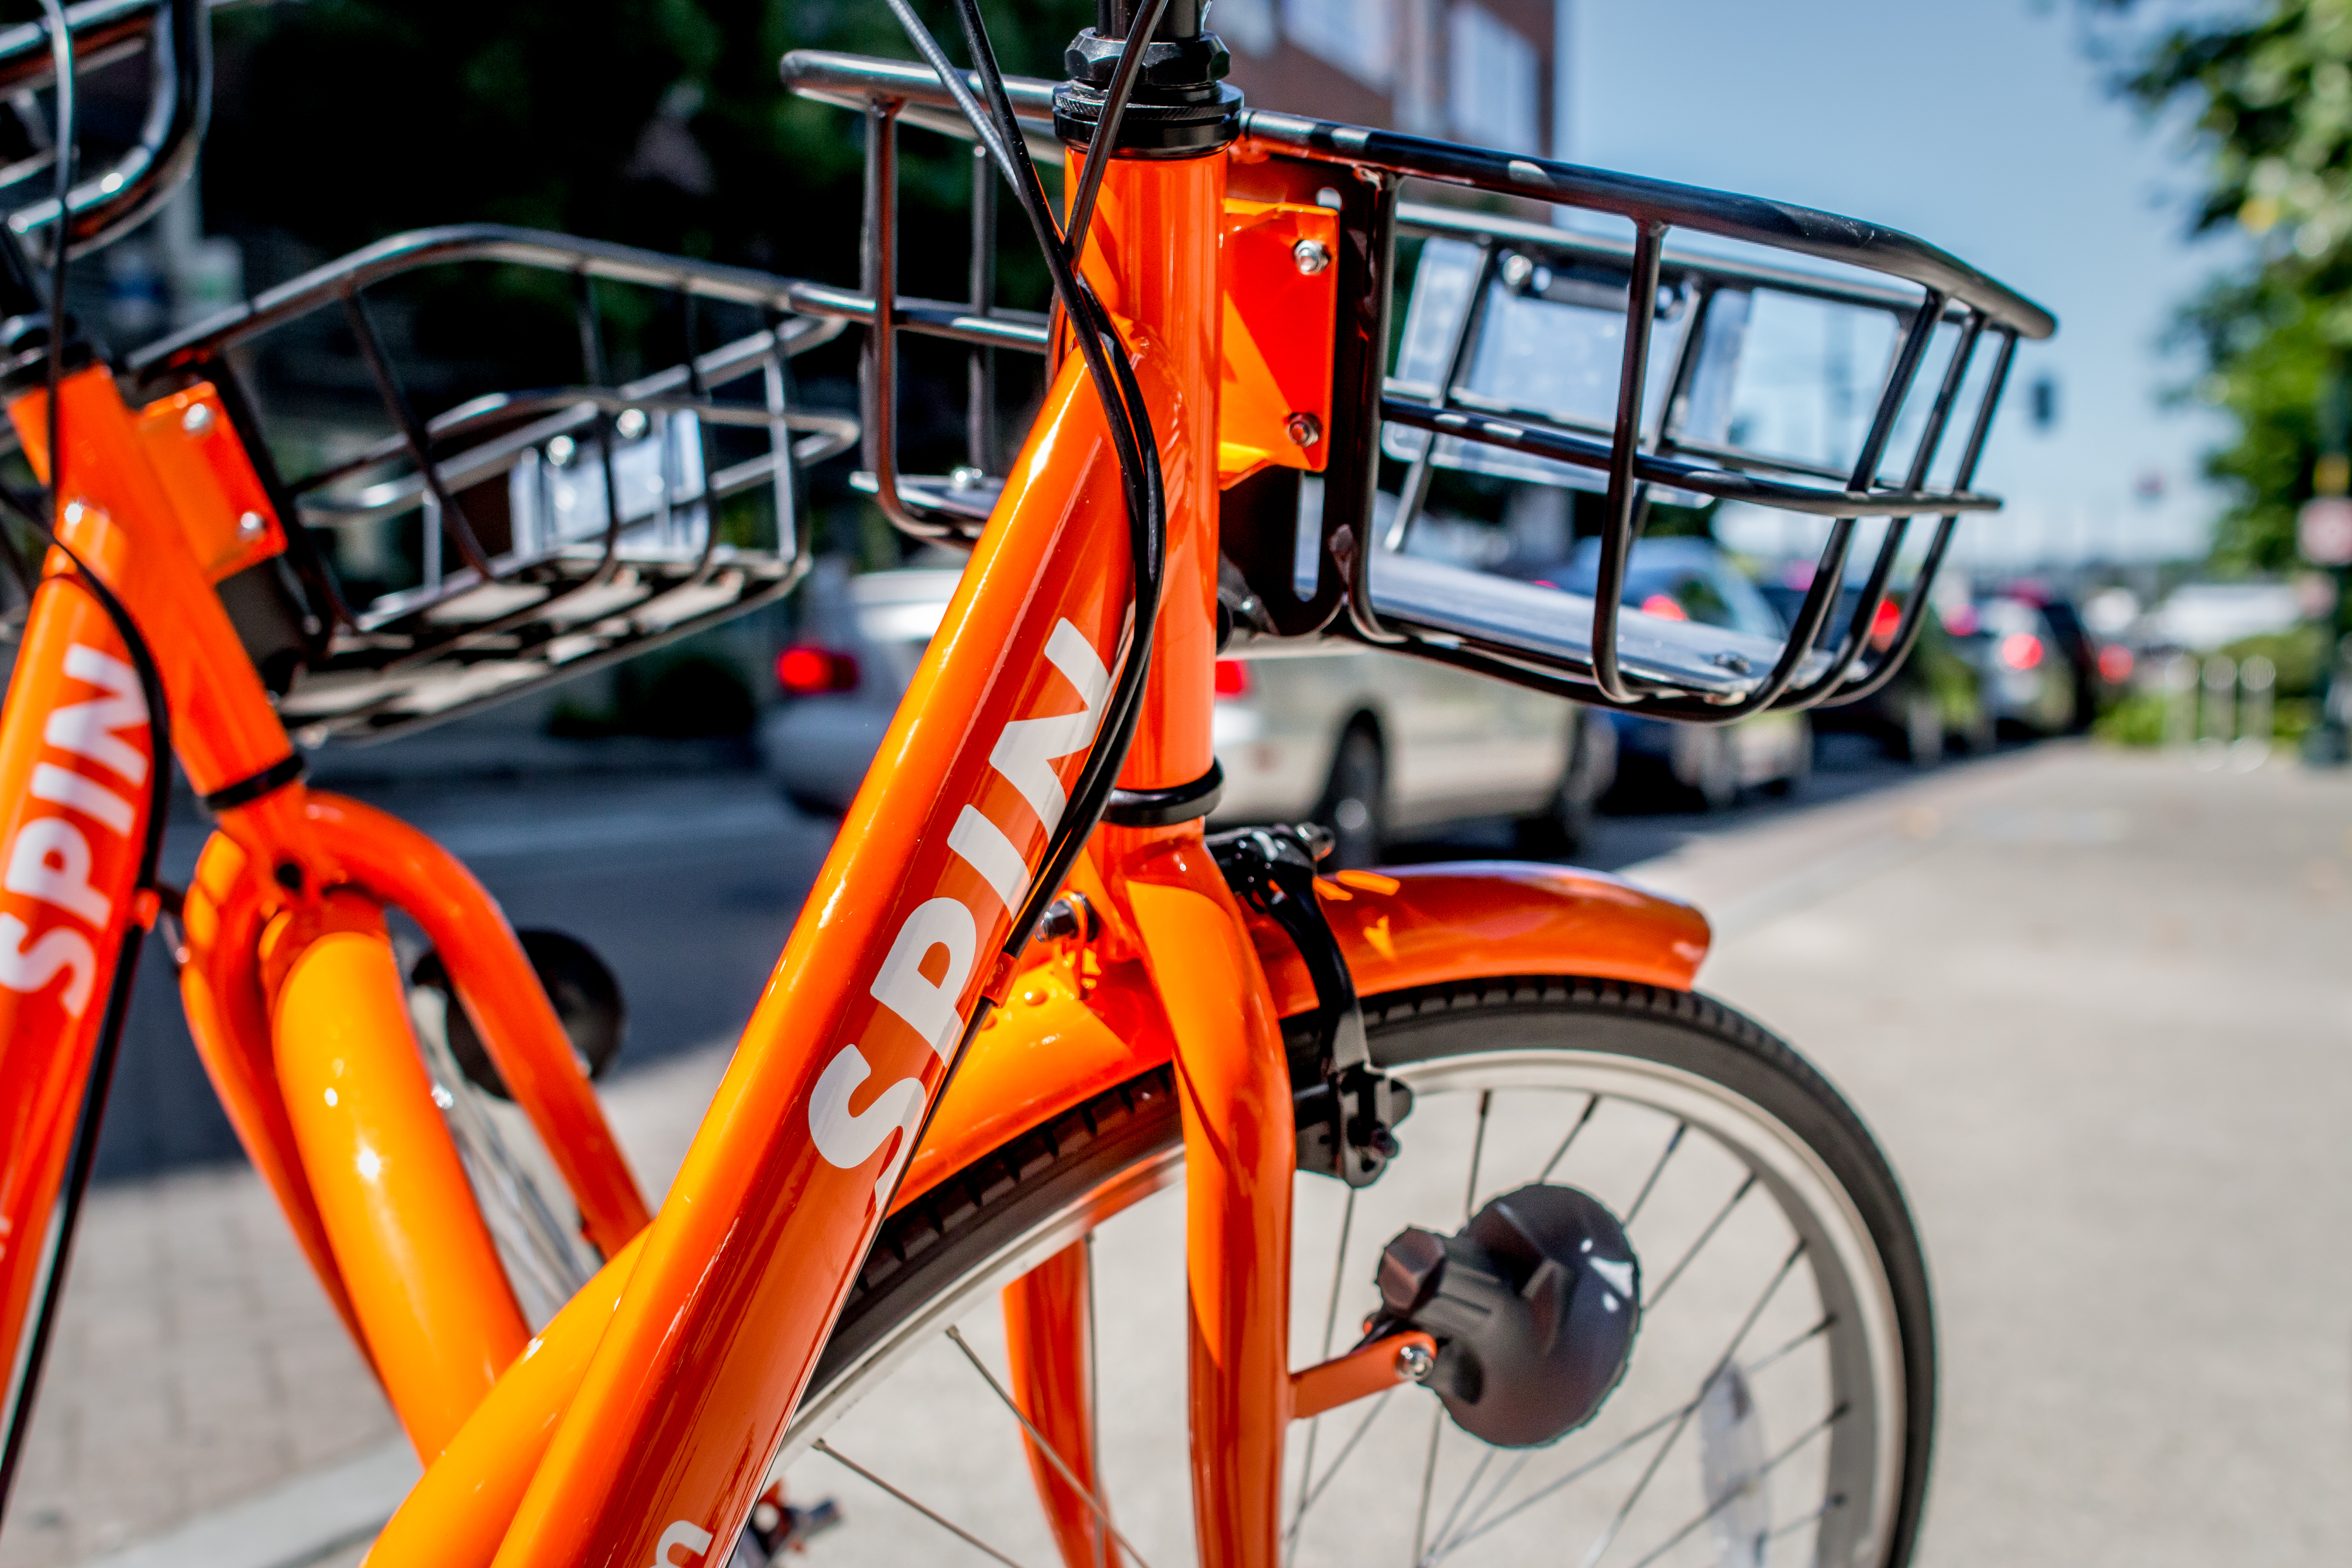 La Salle University is launching a bike share program in partnership with the company Spin. (Photo credit: Spin)